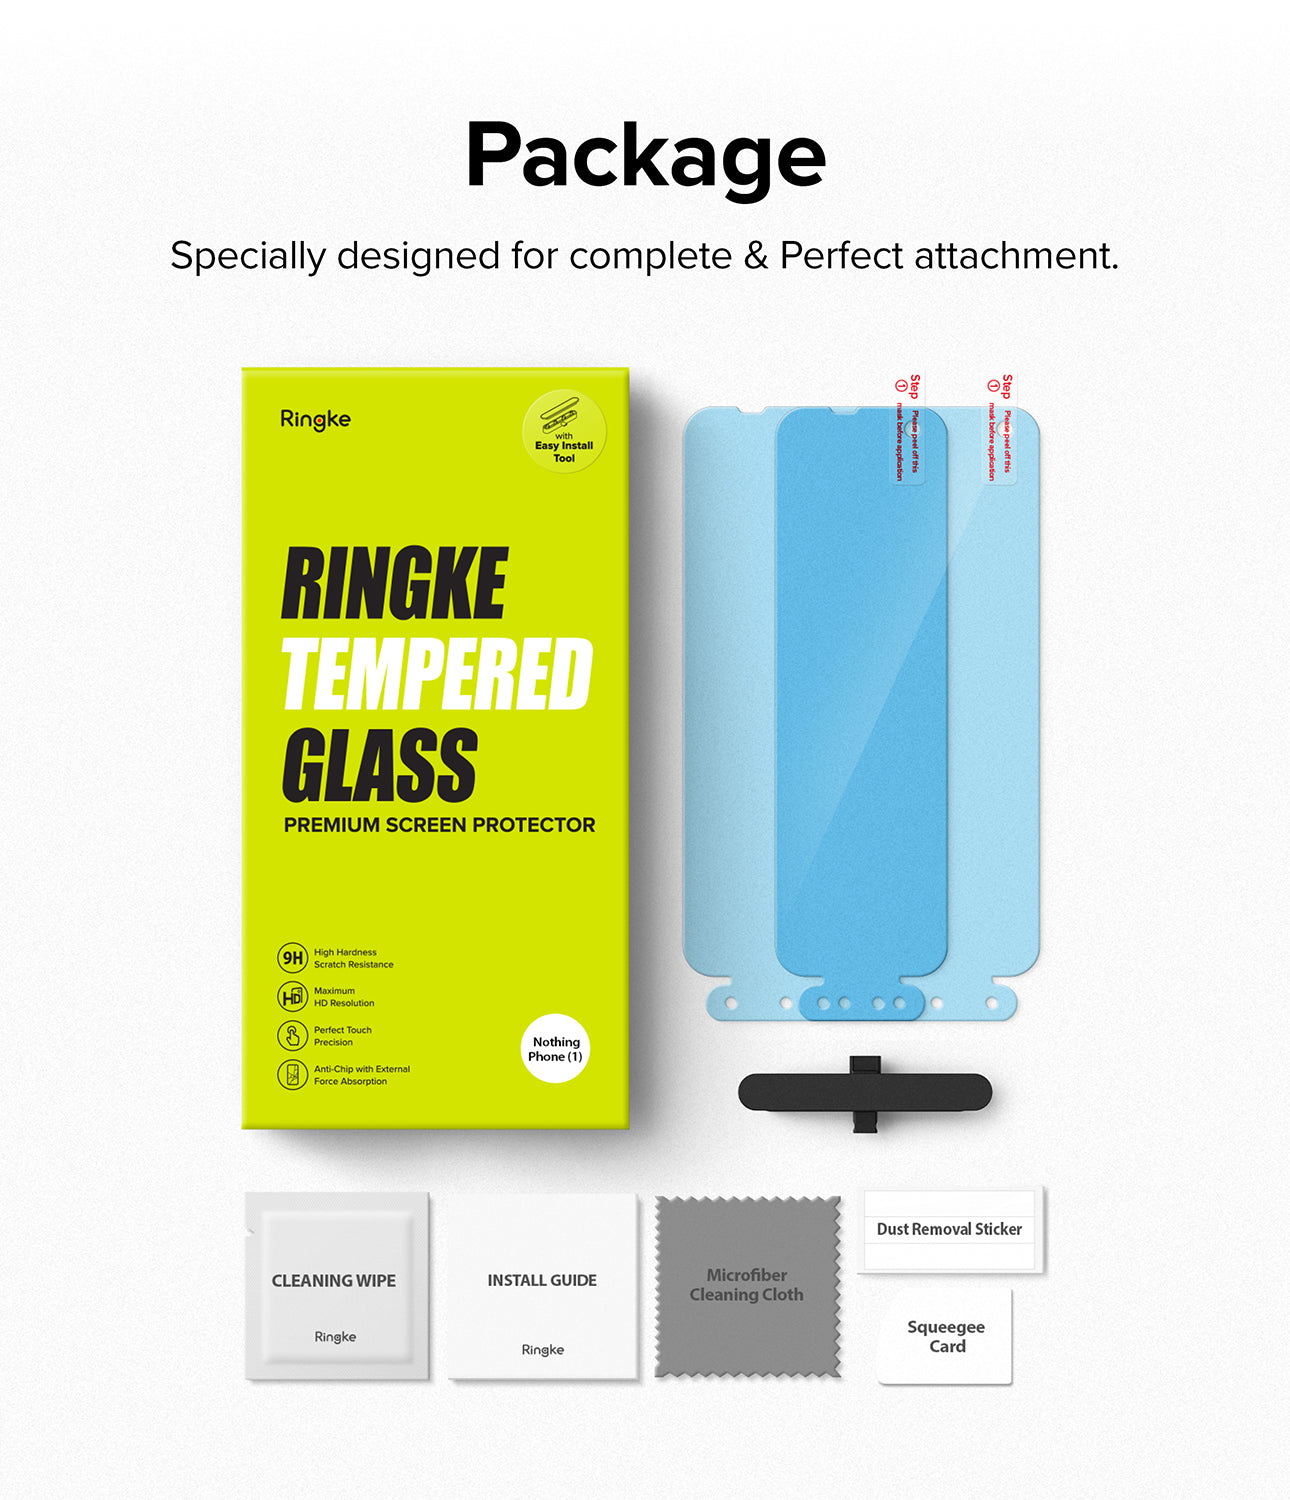 Nothing Phone (1) Screen Protector | Glass